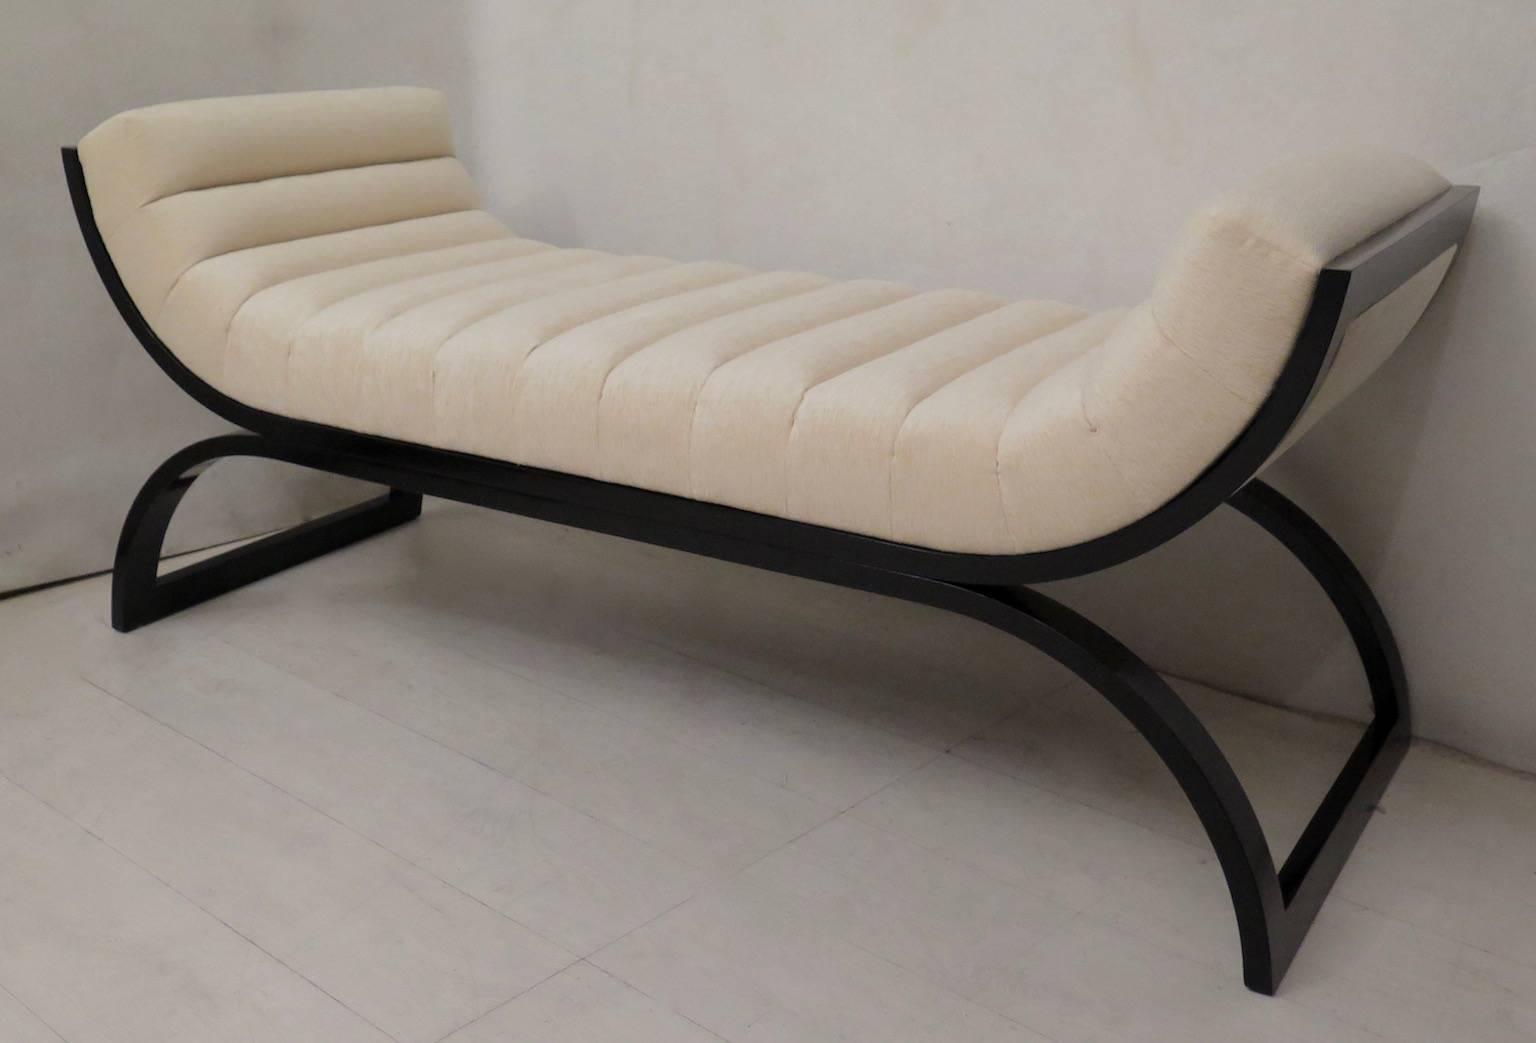 French dormeuse, Art Deco; all in black lacquered wood. Very very particular its design. Beautiful and linear, a unique item of its kind. White fabric, light velvet.